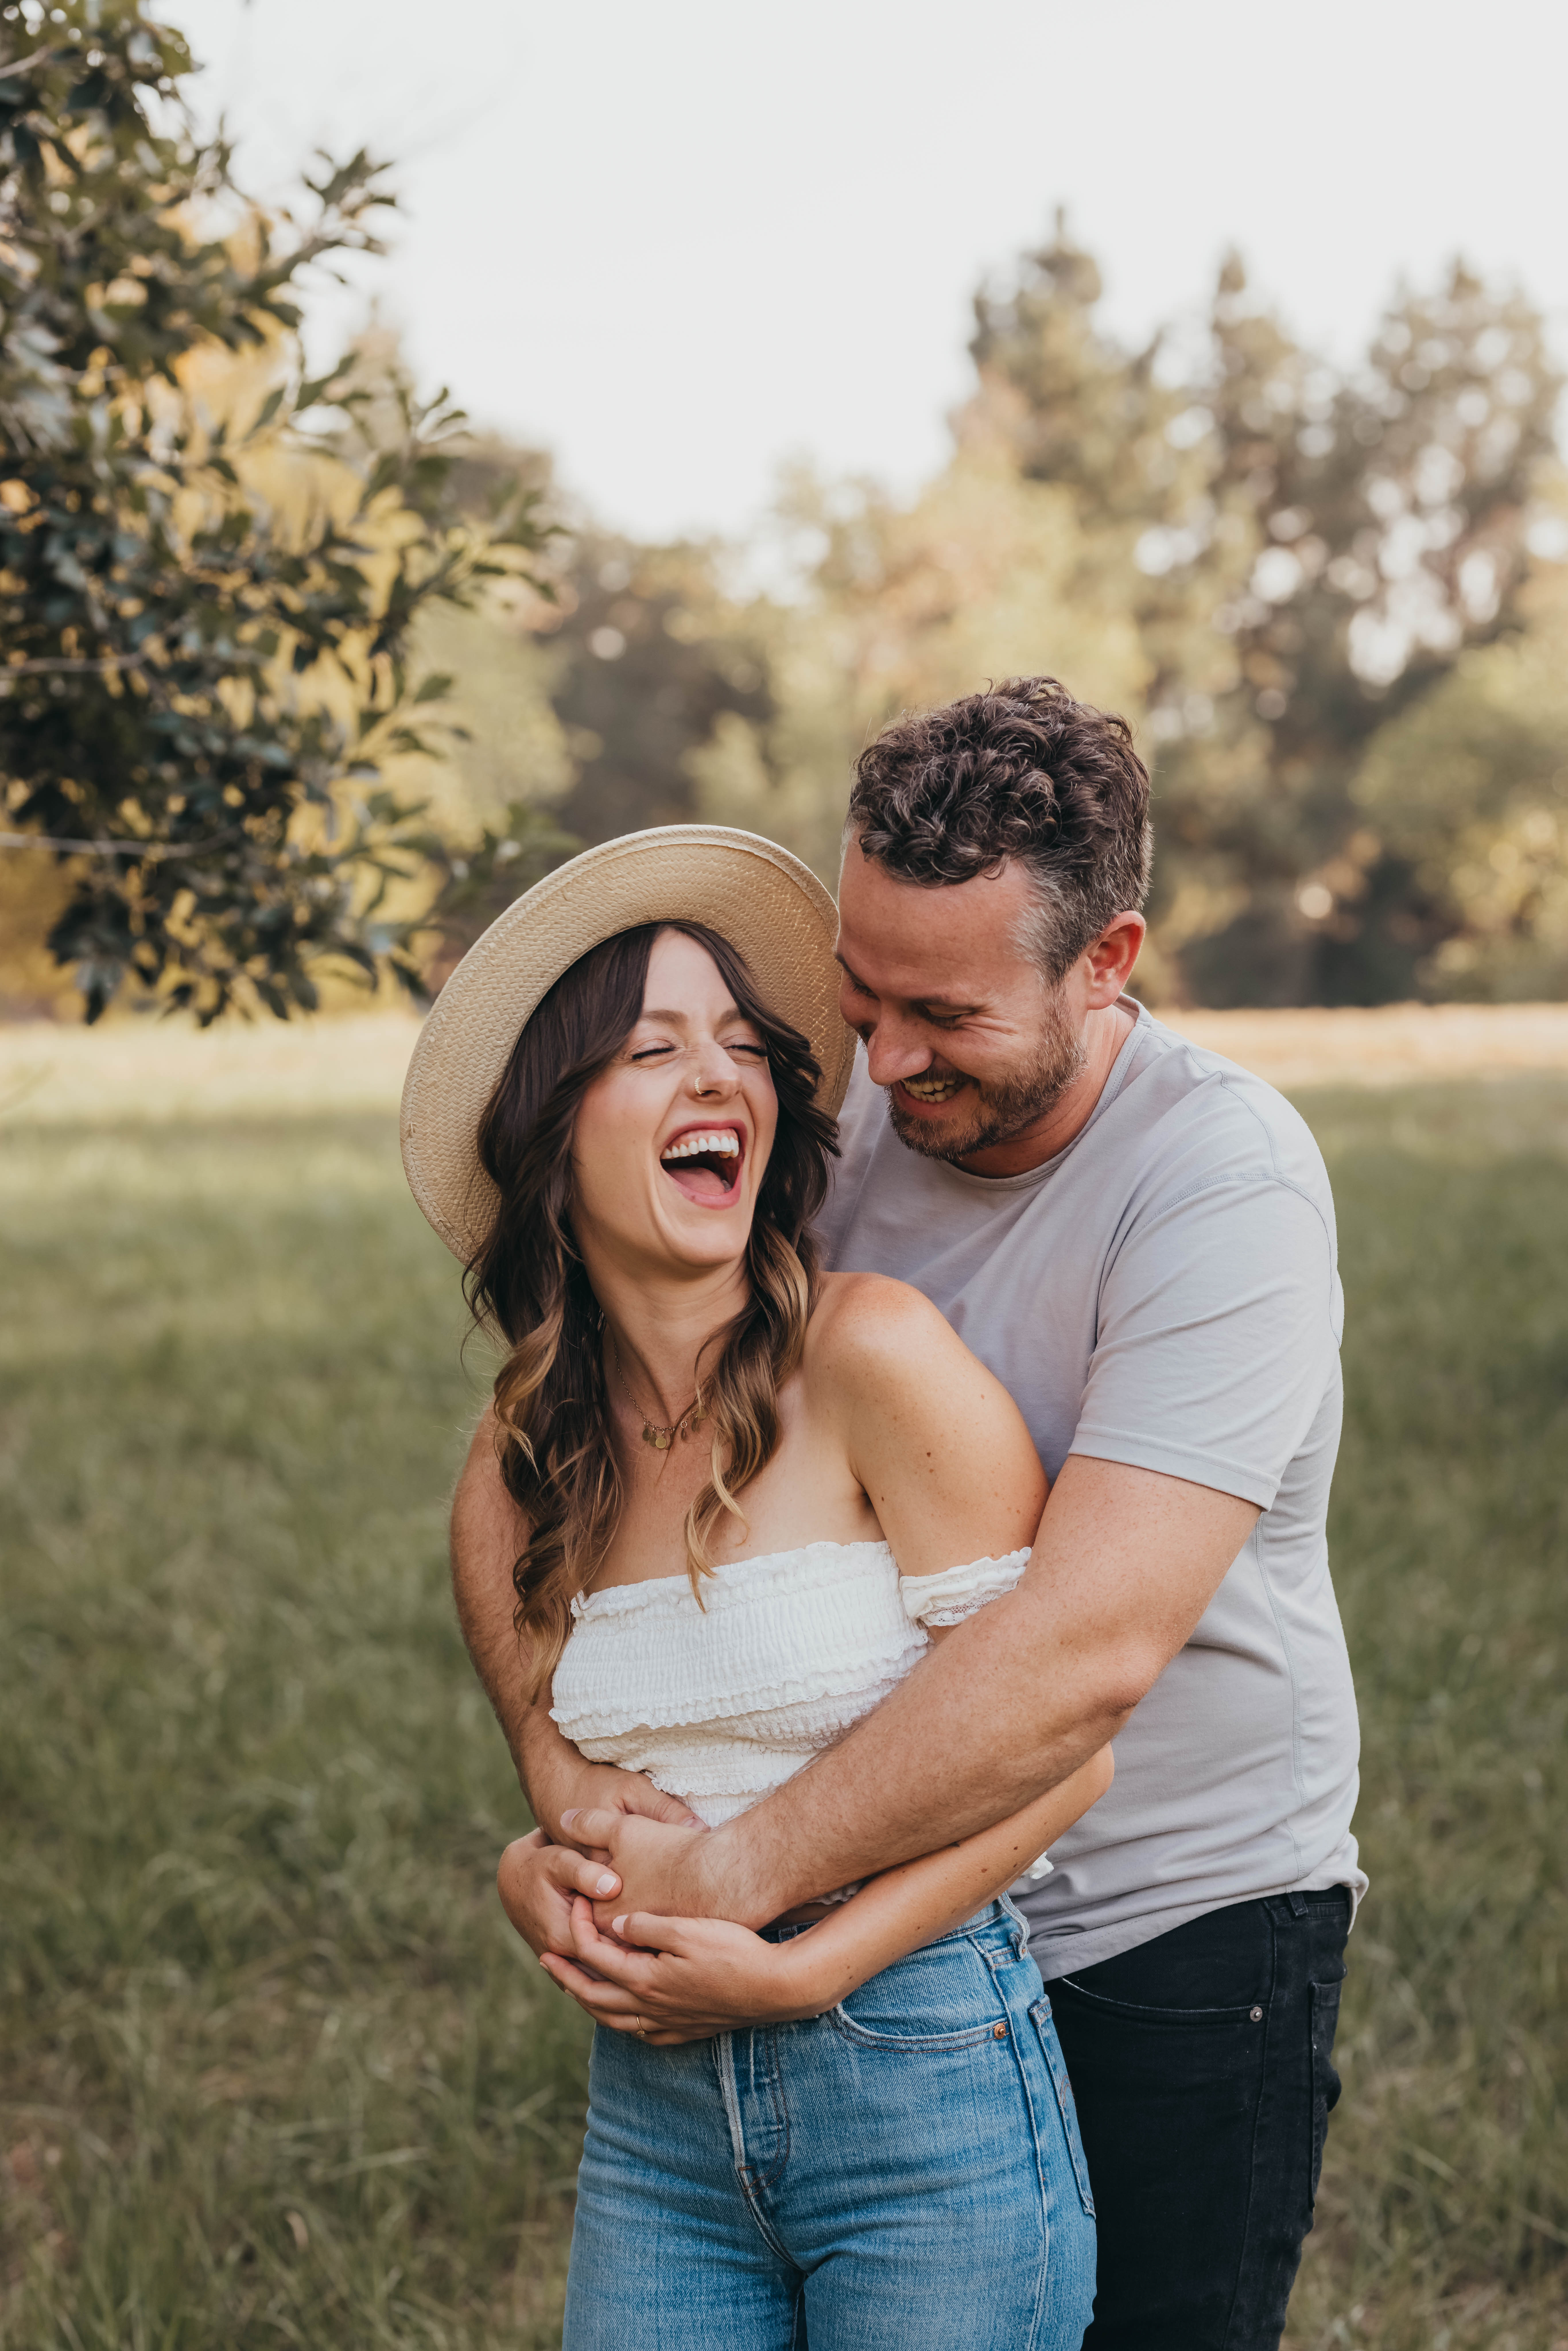 5 ways to make your engagement session more meaningful